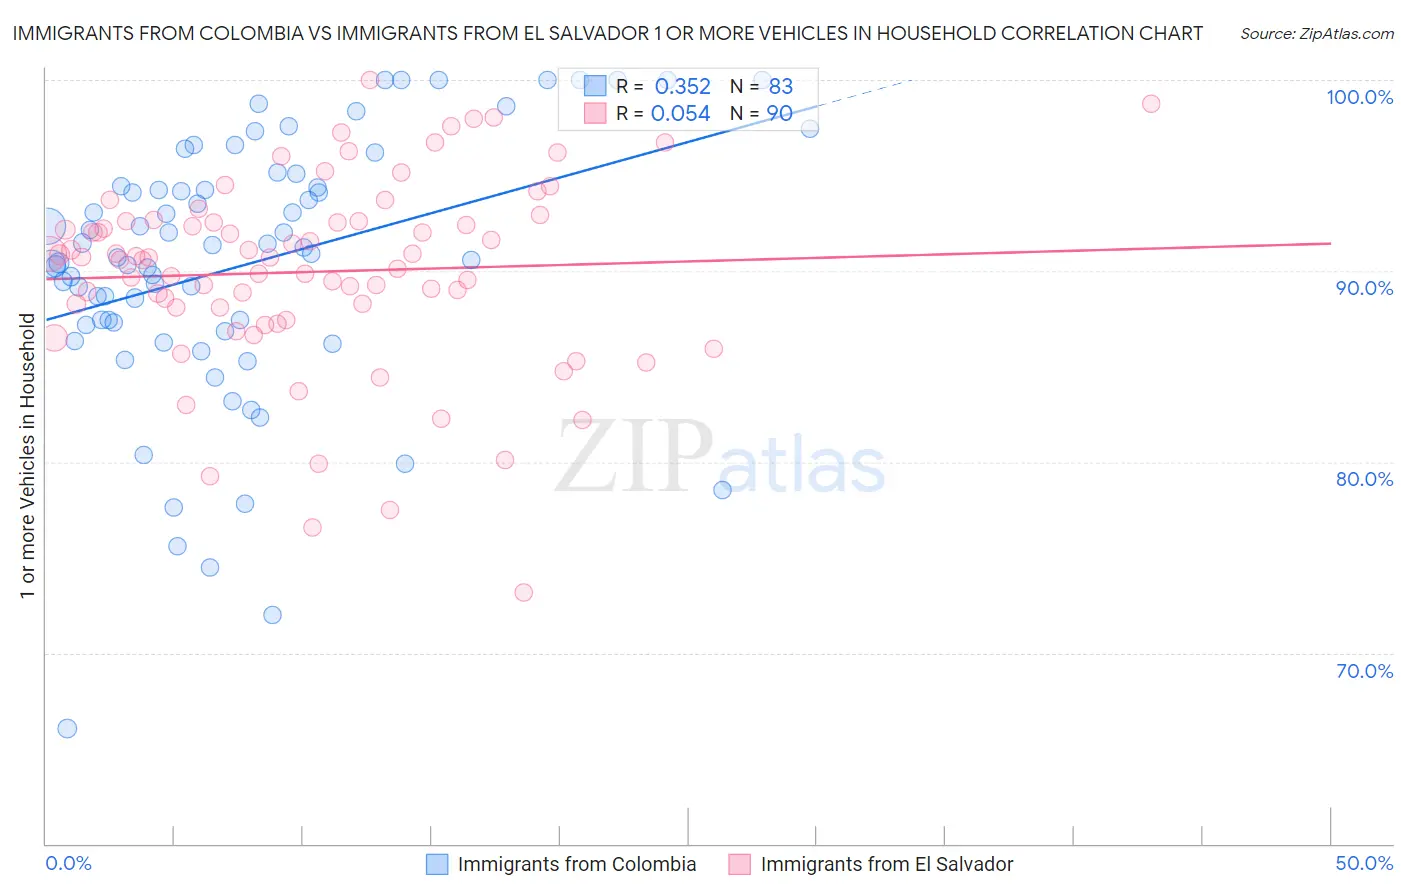 Immigrants from Colombia vs Immigrants from El Salvador 1 or more Vehicles in Household